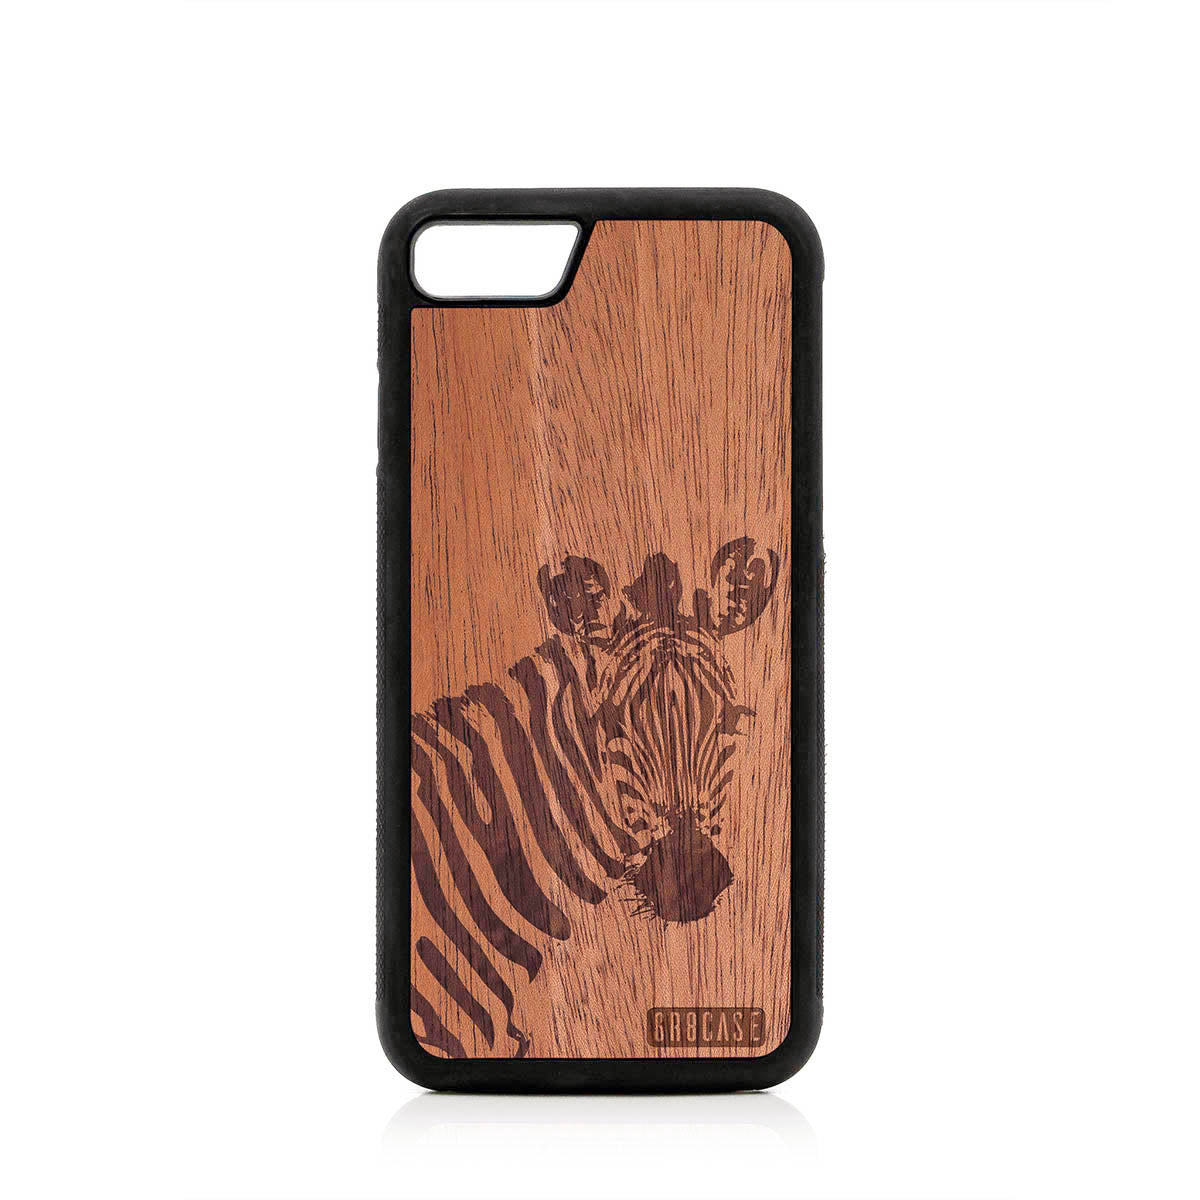 Lookout Zebra Design Wood Case For iPhone 7/8